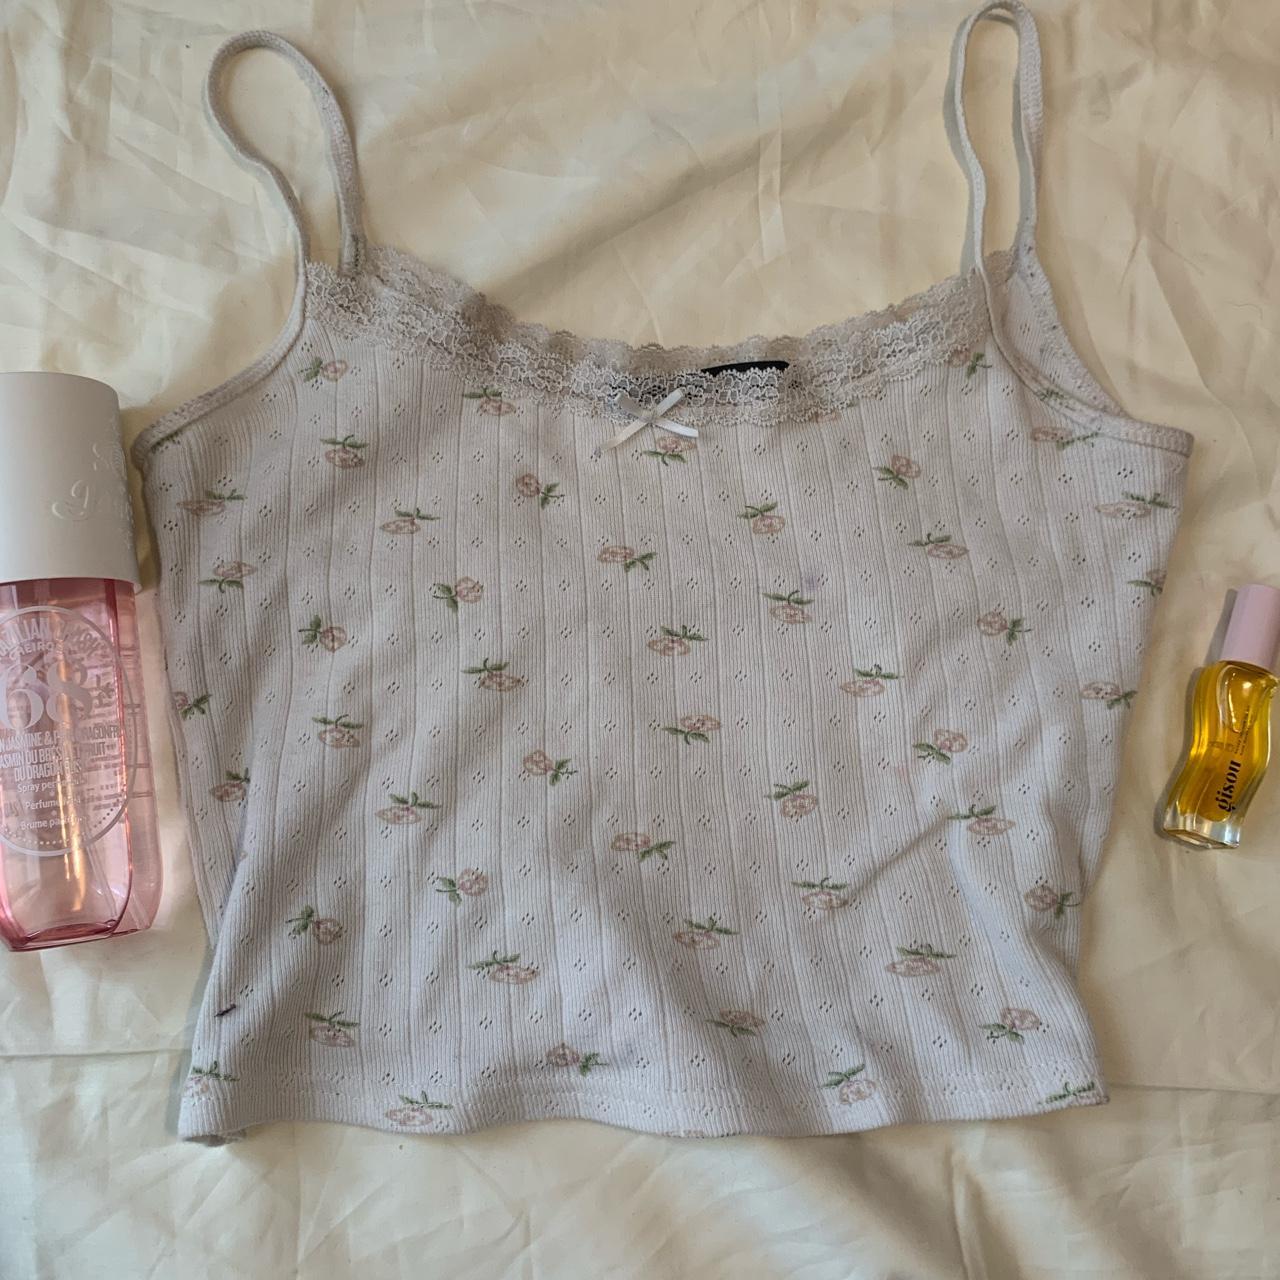 BRANDY MELVILLE ROSE PINK LACE COQUETTE TANK